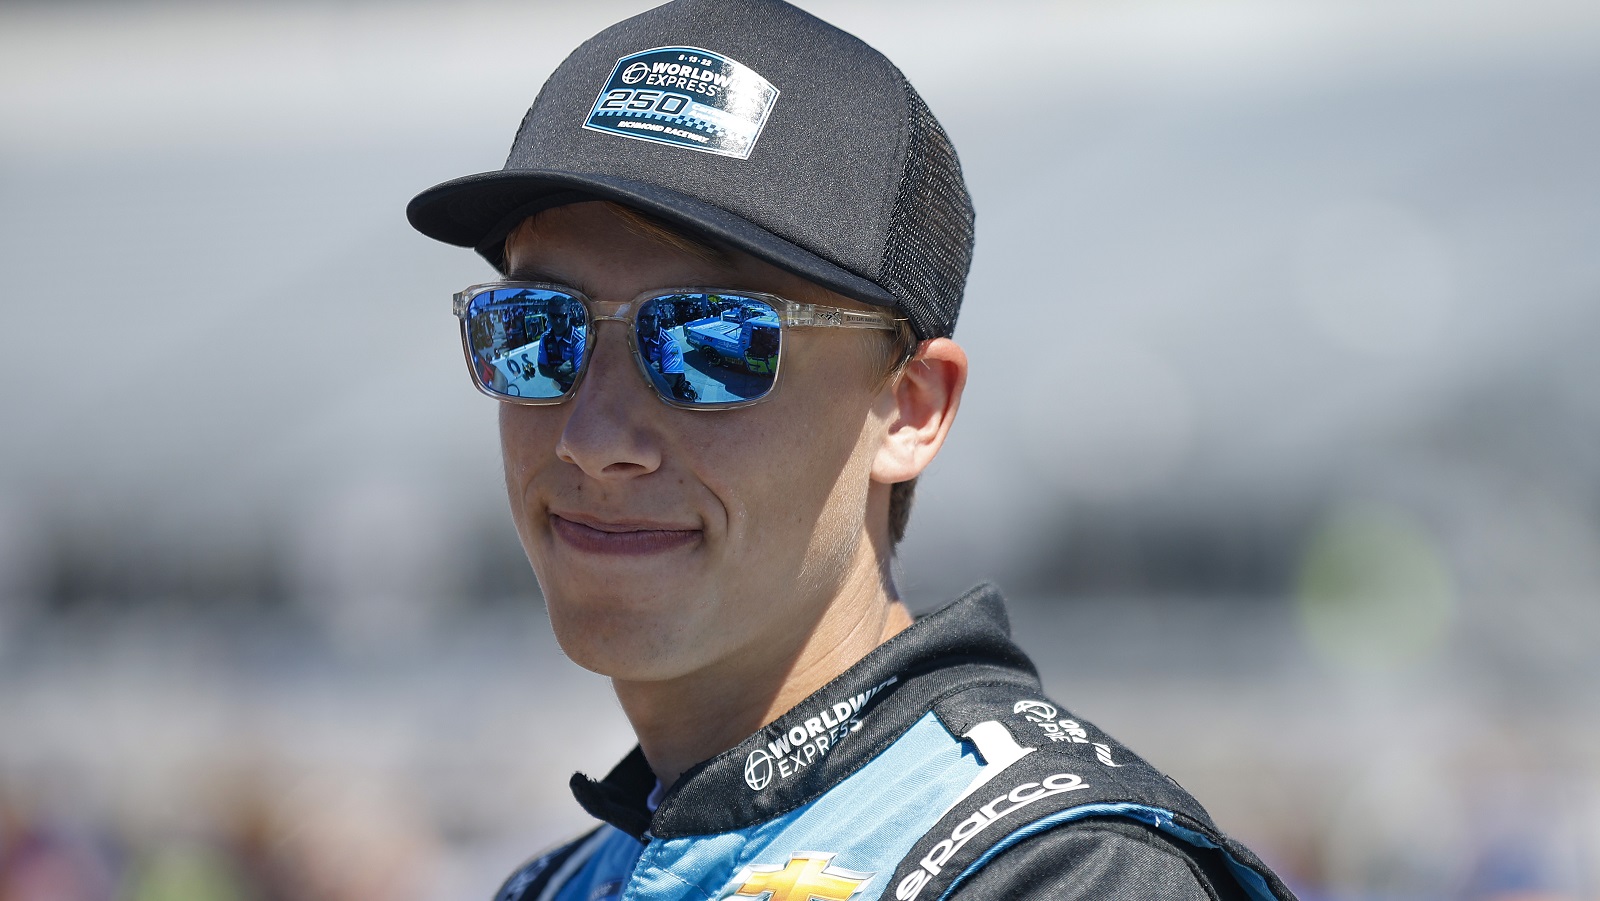 Carson Hocevar waits on the grid during practice for the NASCAR Camping World Truck Series Worldwide Express 250 for Carrier Appreciation at Richmond Raceway on Aug. 13, 2022. | Jared C. Tilton/Getty Images